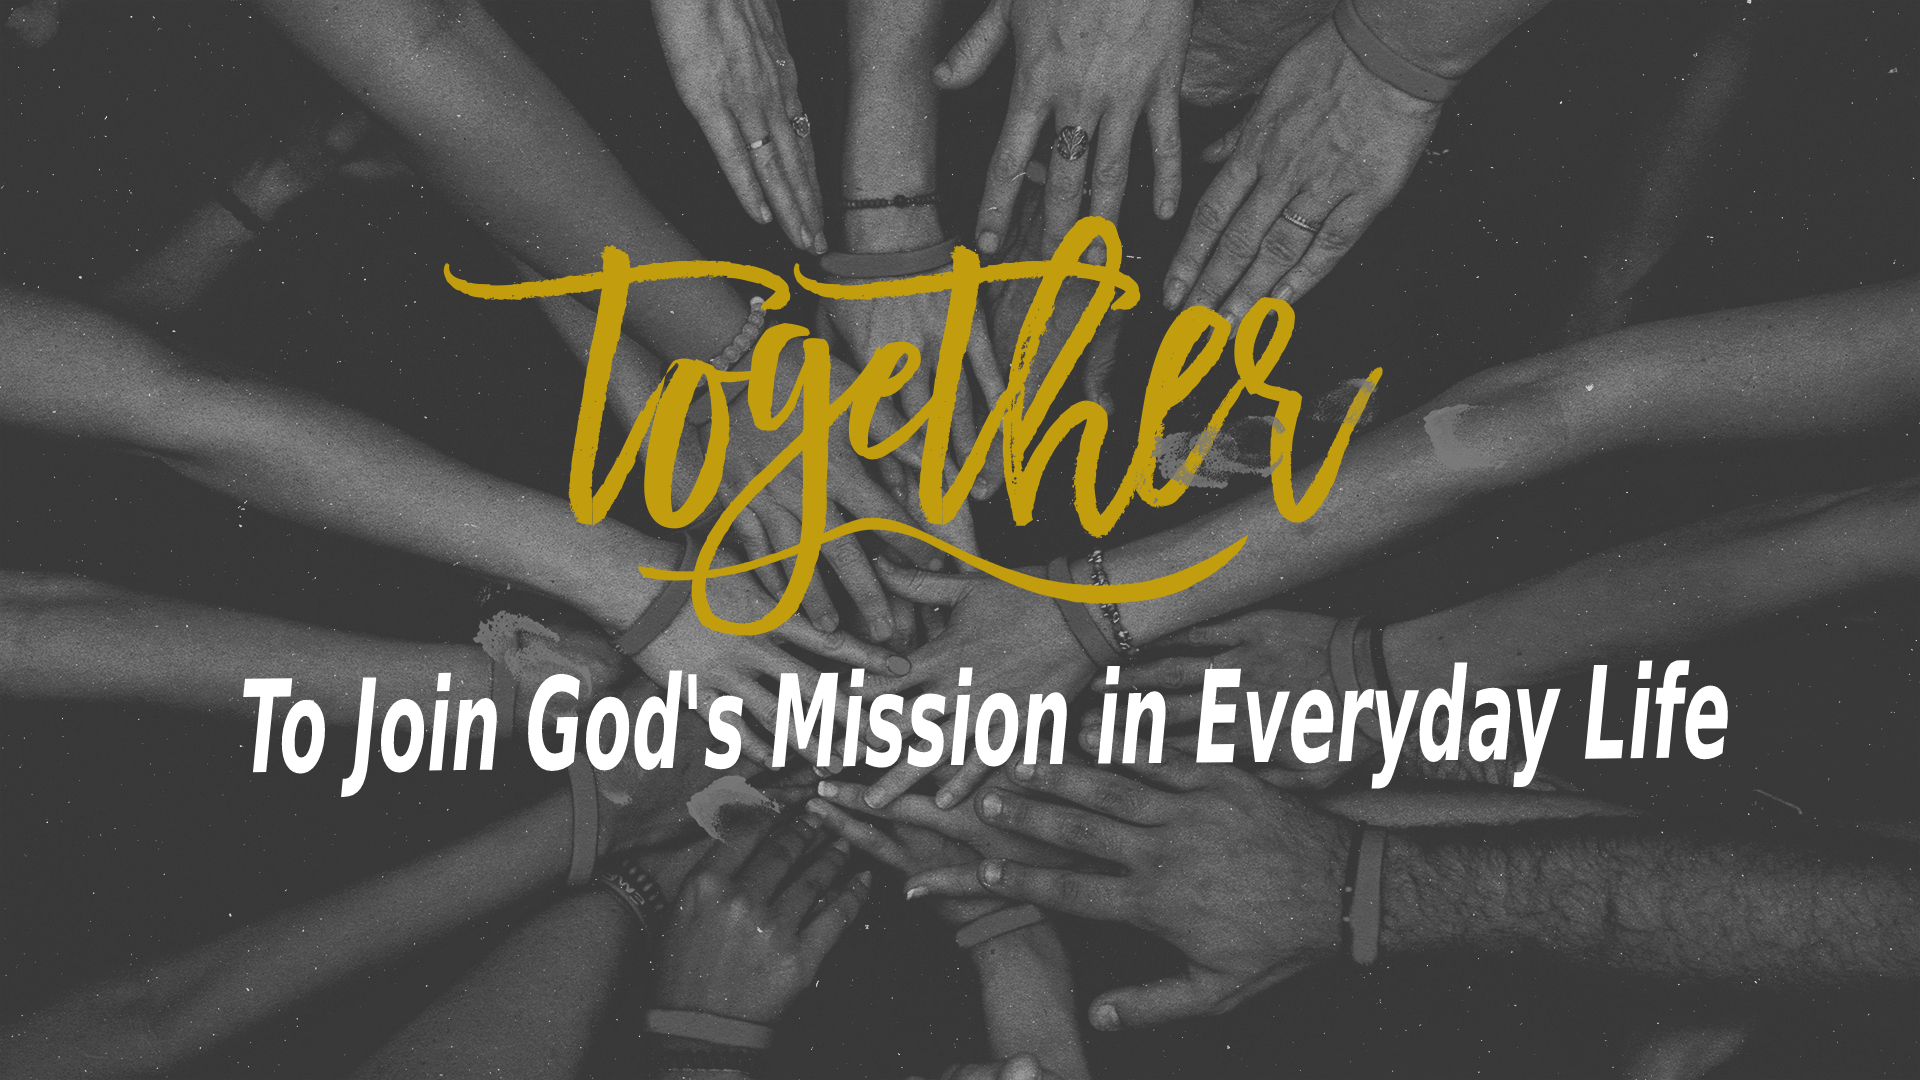 Together: To Join God's Mission in Everyday Life